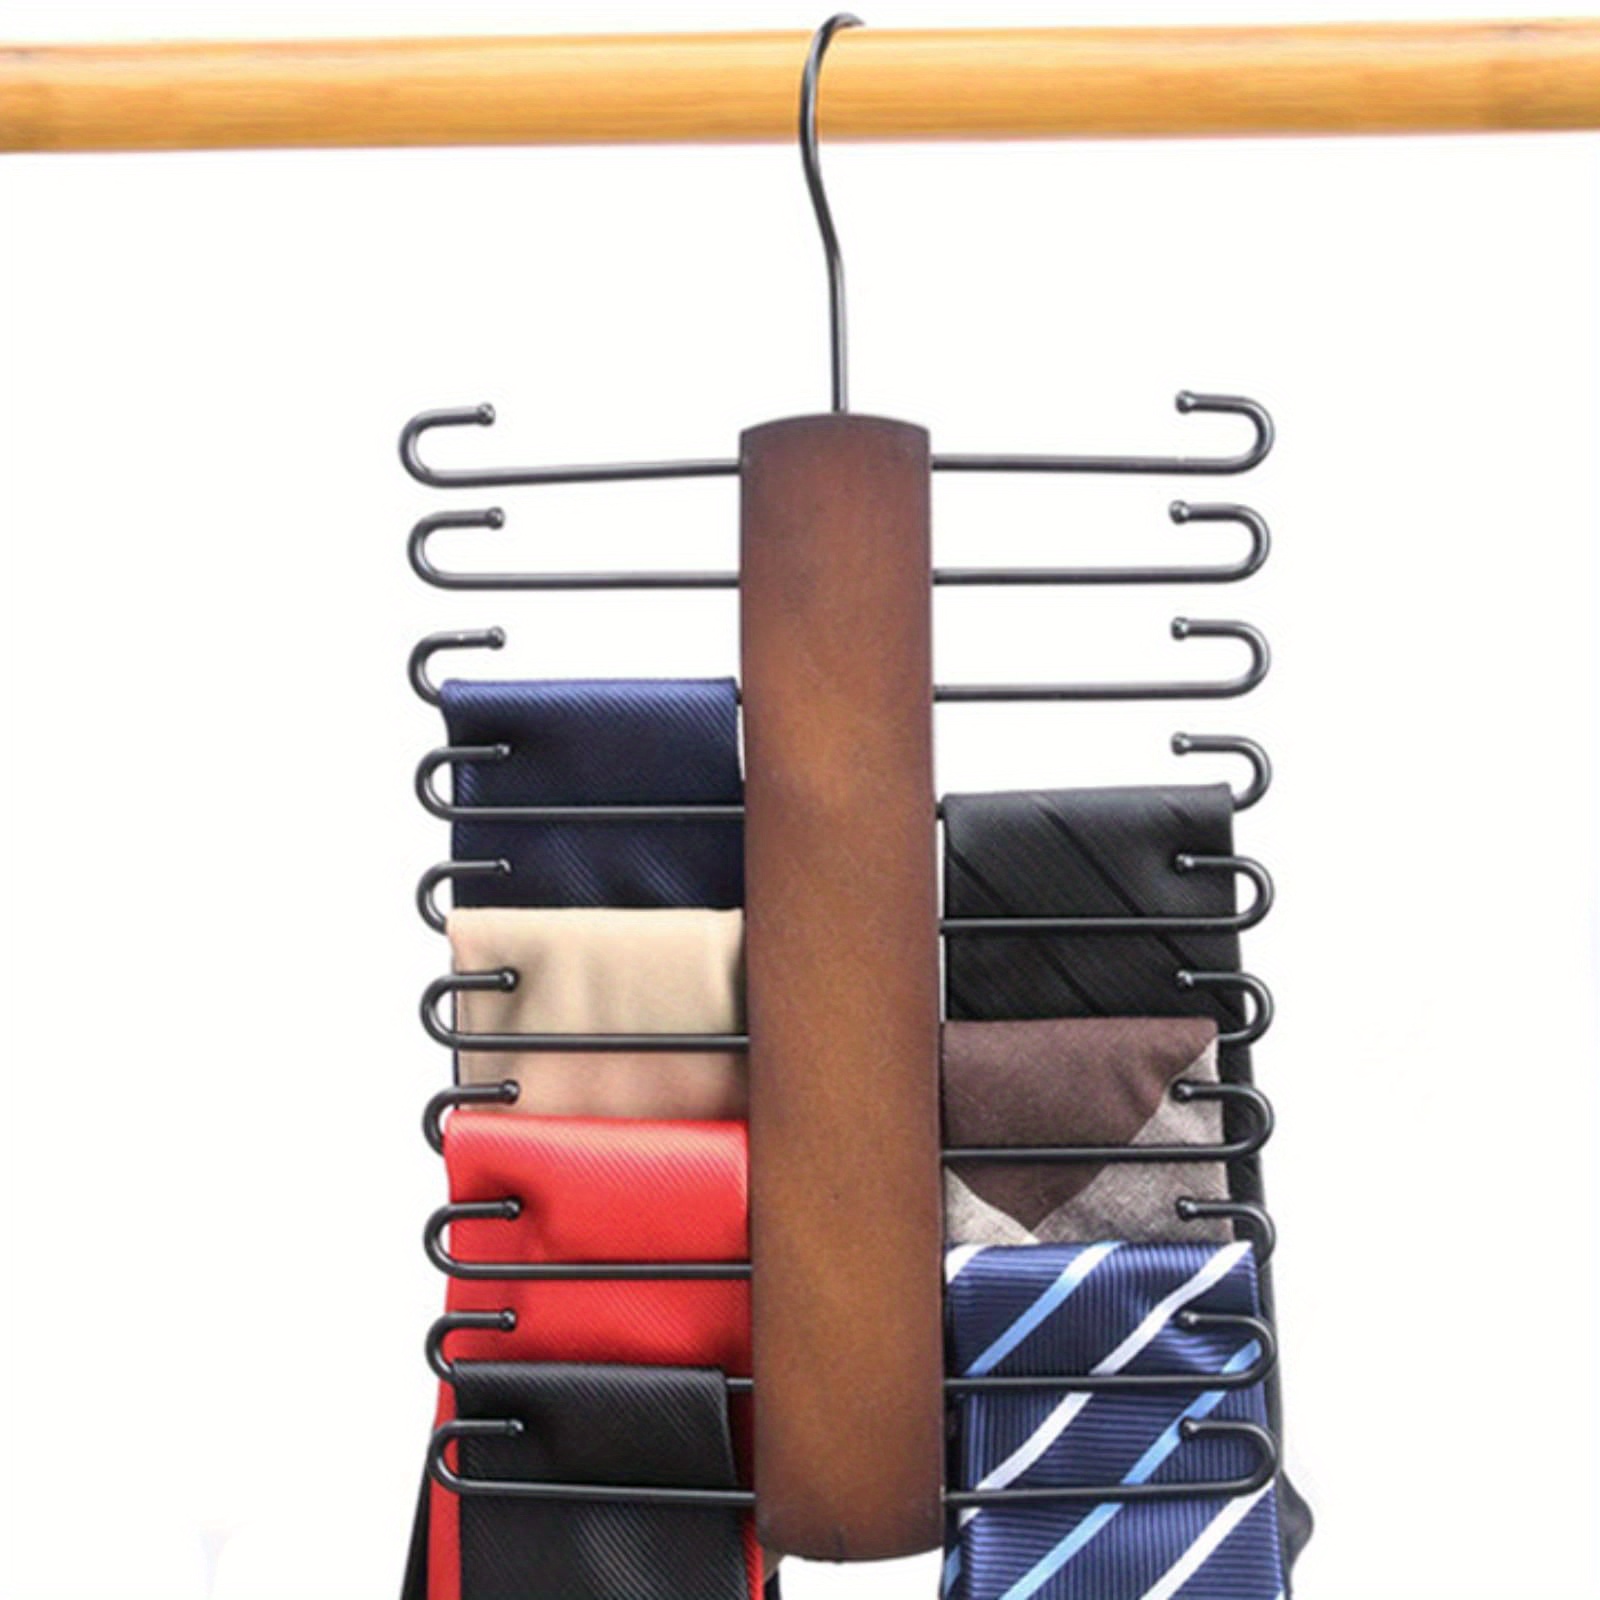 

1pc Wooden Tie Organizer Storage Rack, 360 Degree Rotation Space Saving Tie Holder For 20 Ties, Wooden Tie Hanger And Belt Rack For Home